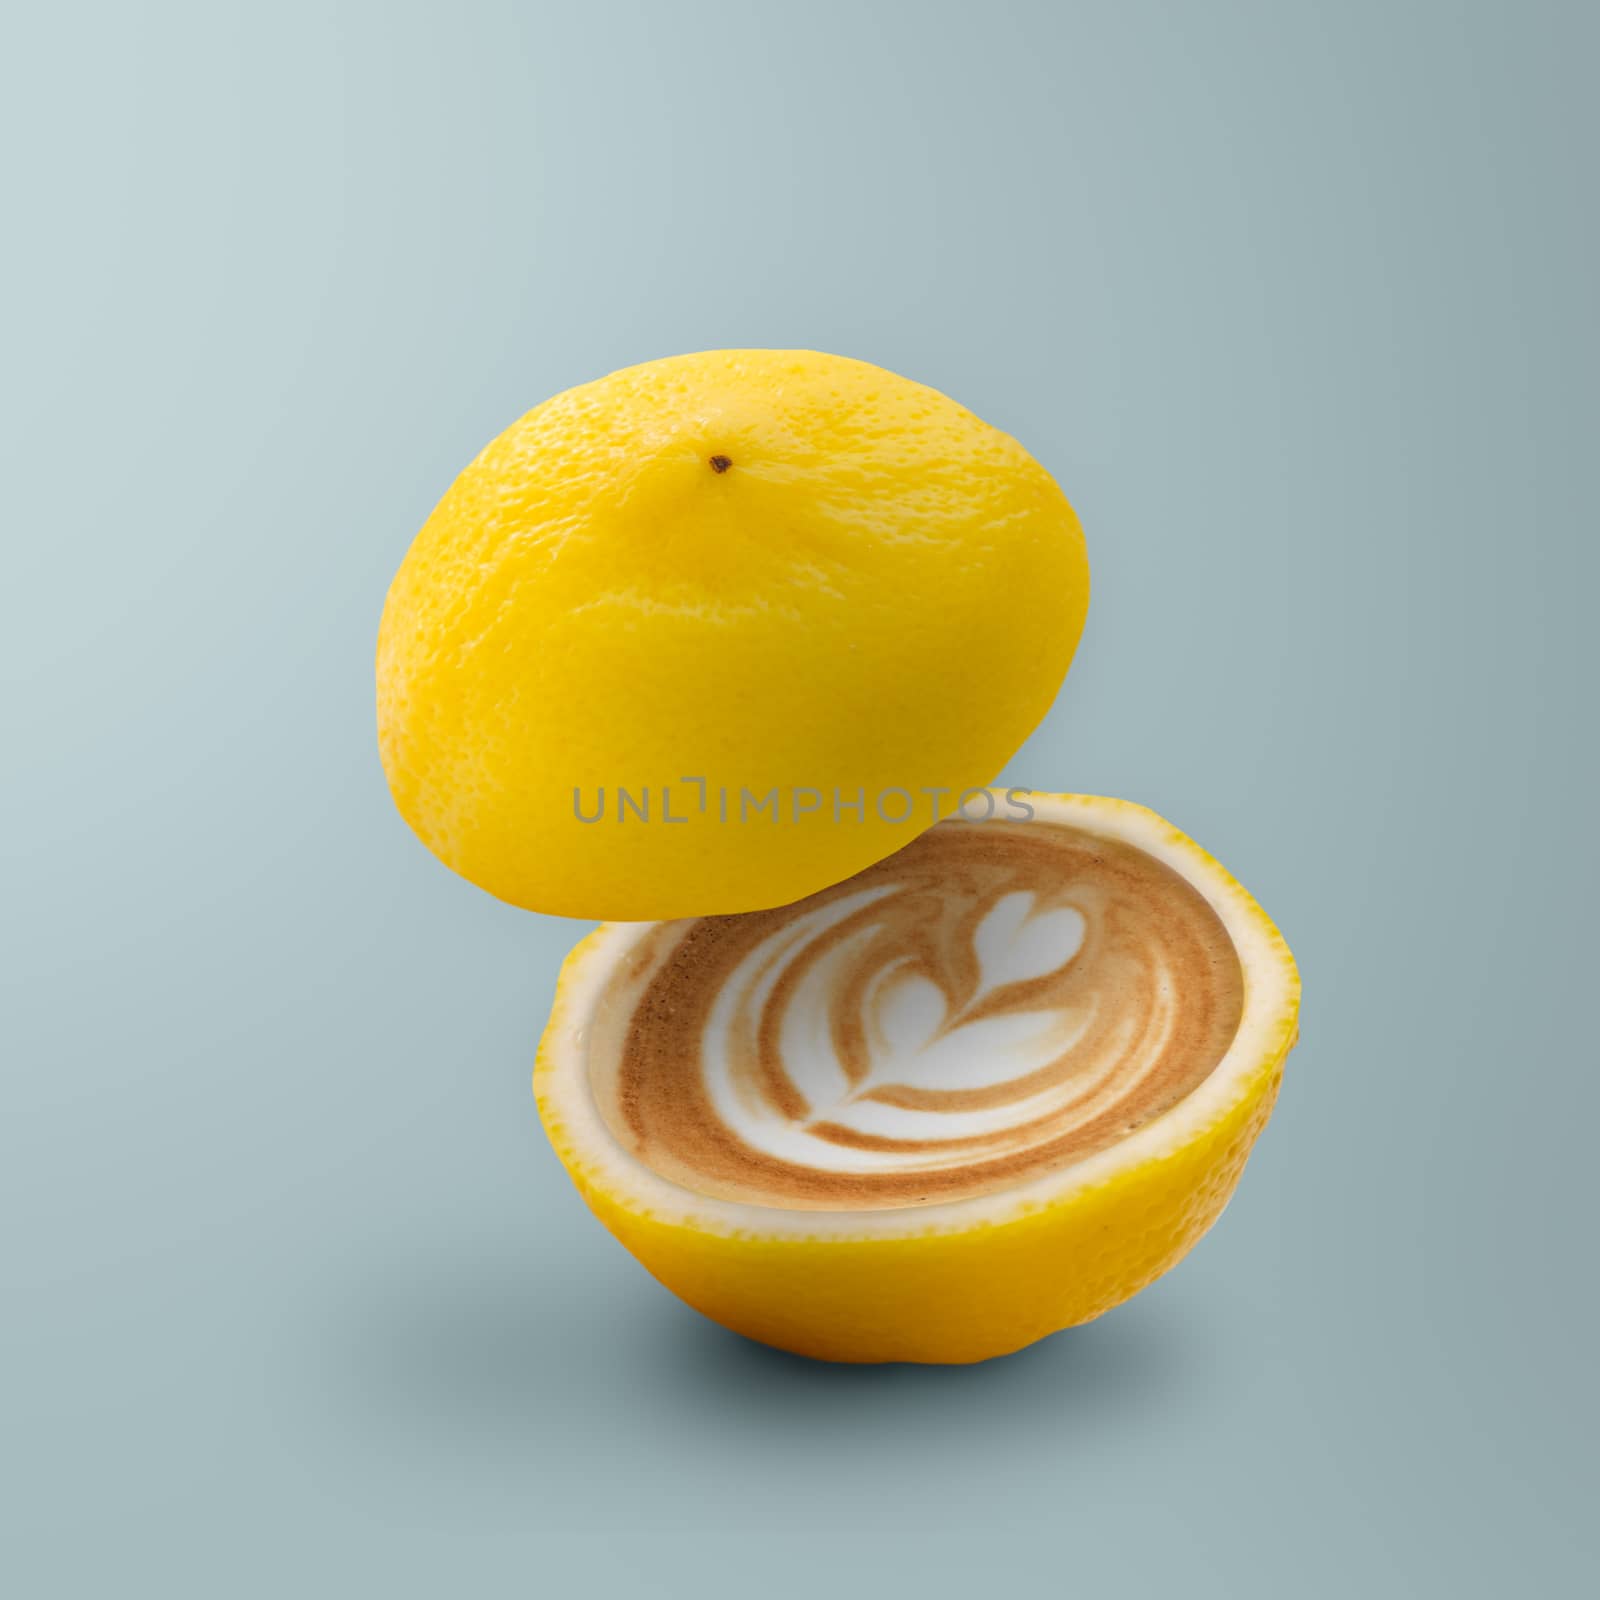 Contemporary art of Lemon with coffee inside on blue background, minimal style. Idea concept of fruit.